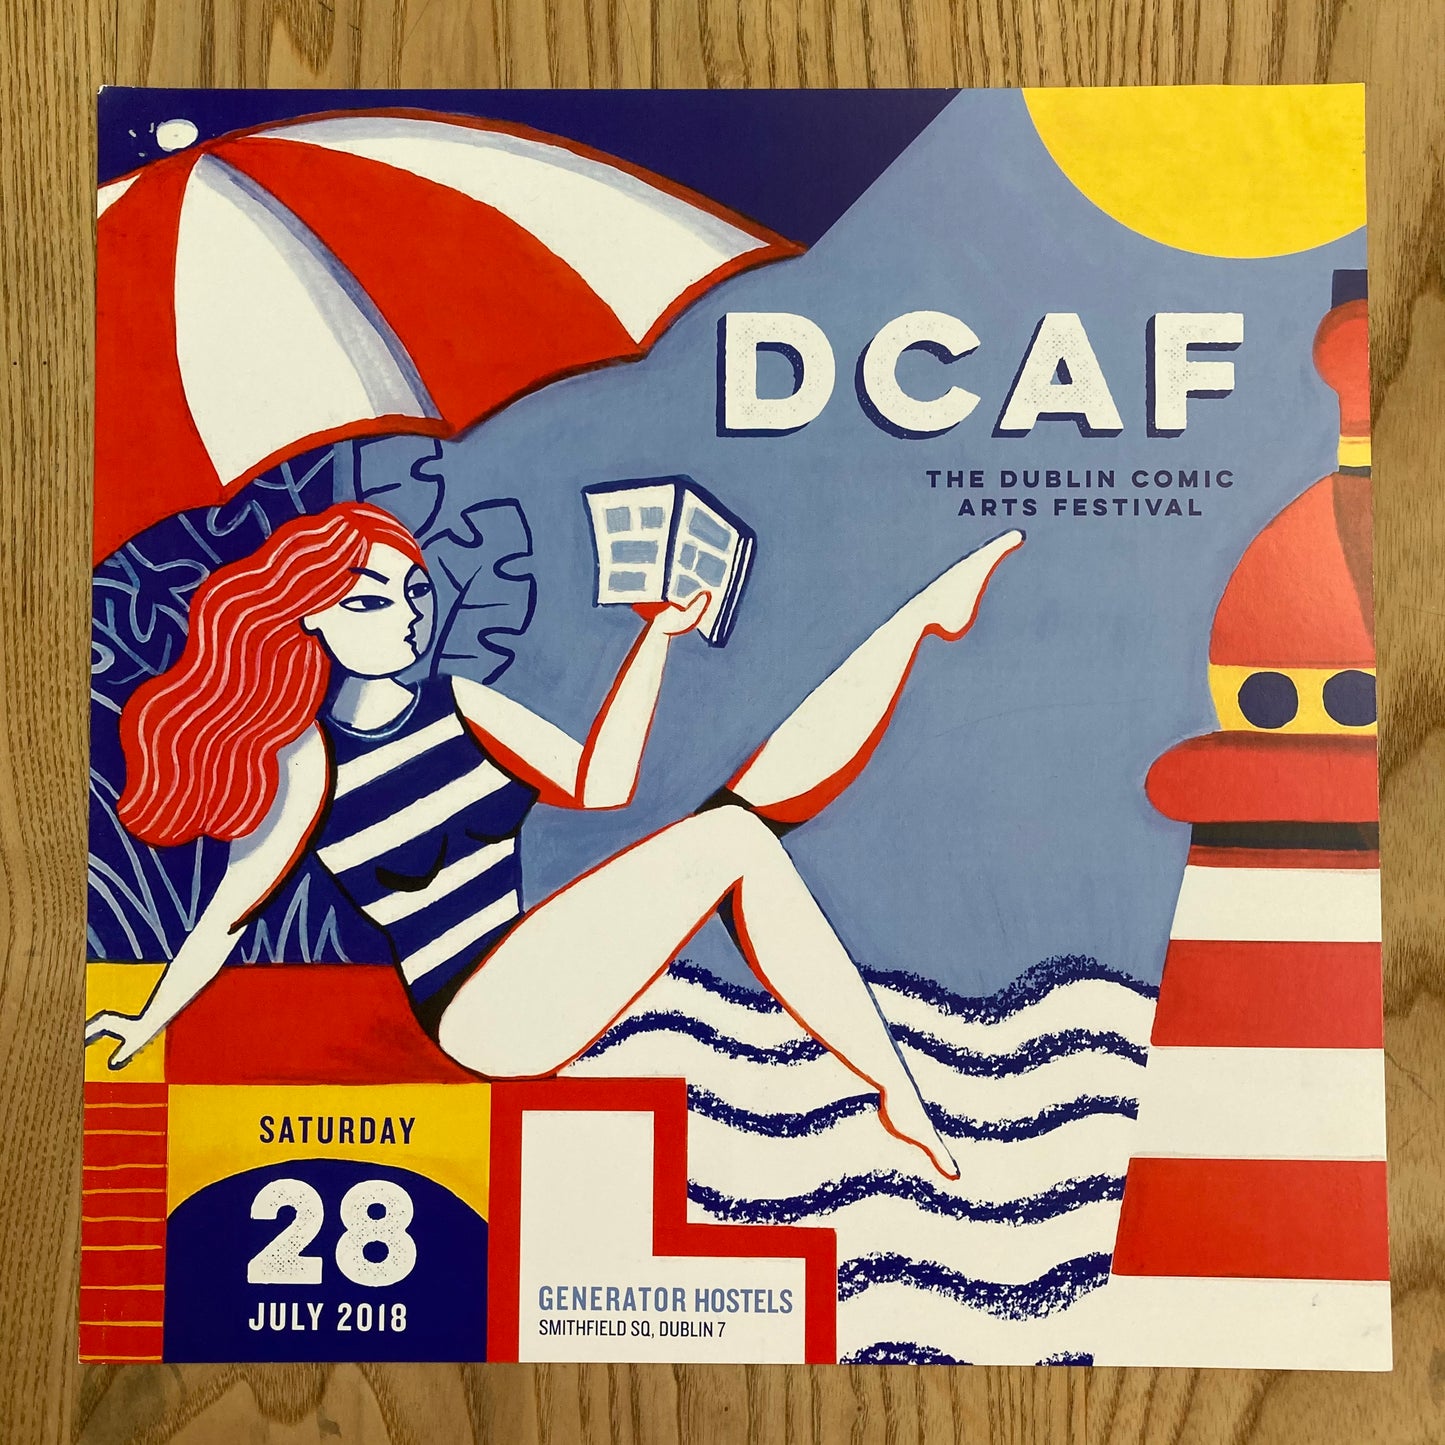 DCAF Poster by Claire Prouvost, Summer 2018